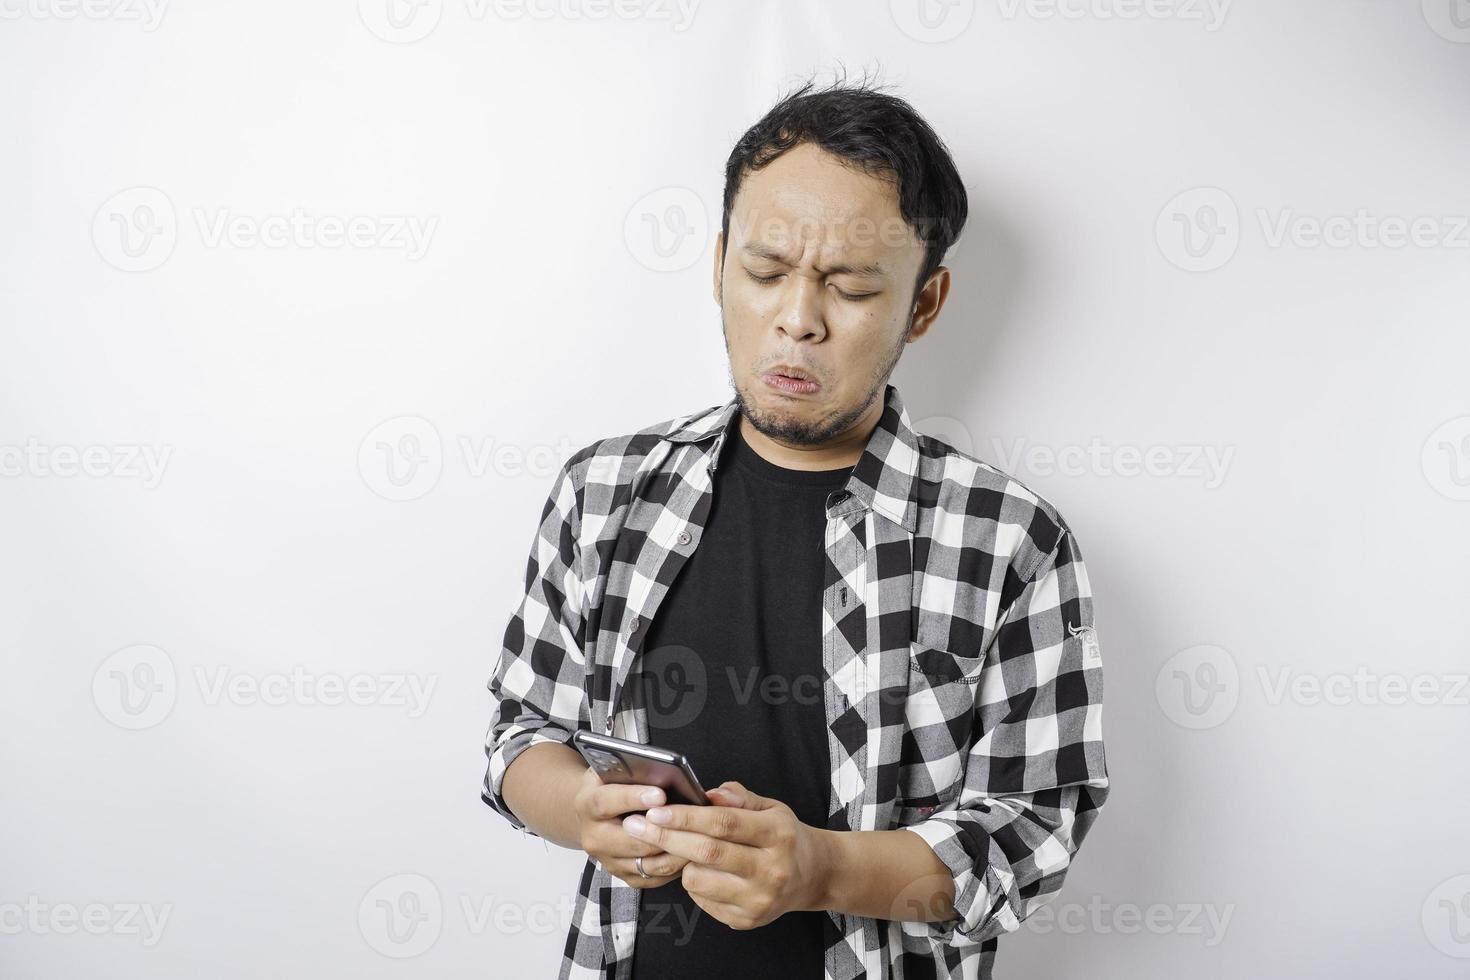 A dissatisfied young Asian man looks disgruntled wearing tartan shirt irritated face expressions holding his phone photo